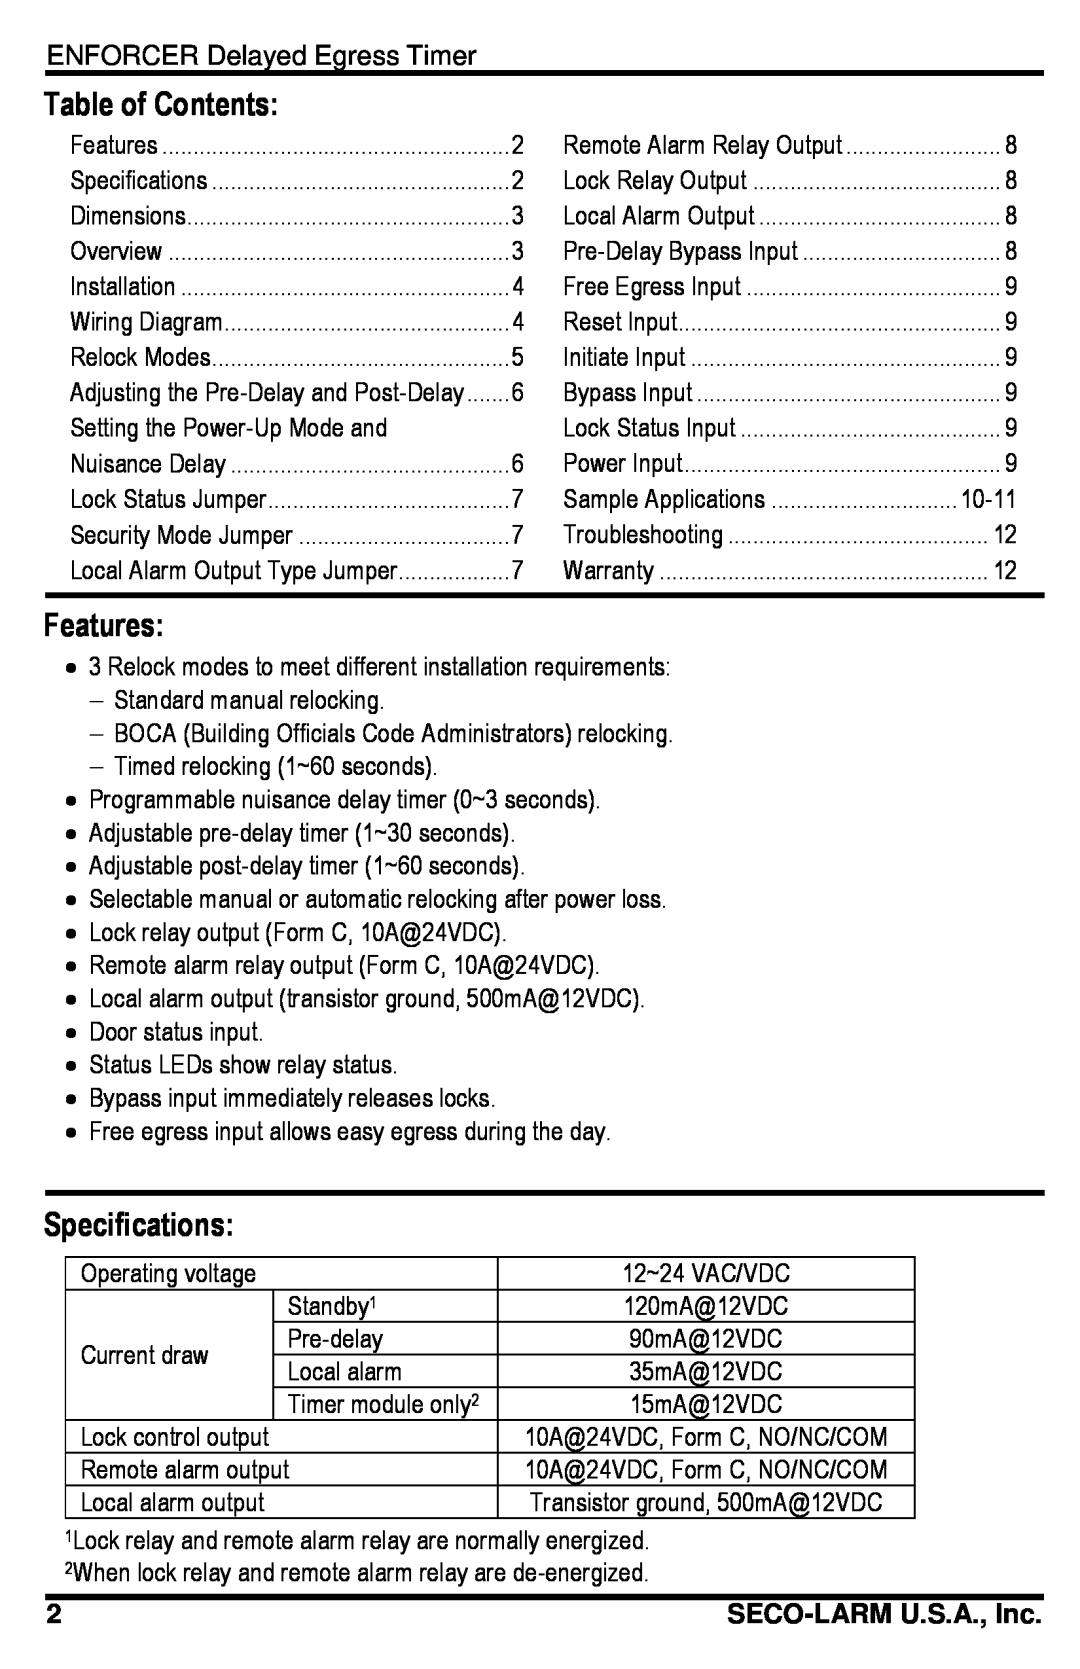 SECO-LARM USA SA-025EQ manual Table of Contents, Features, Specifications, SECO-LARMU.S.A., Inc 